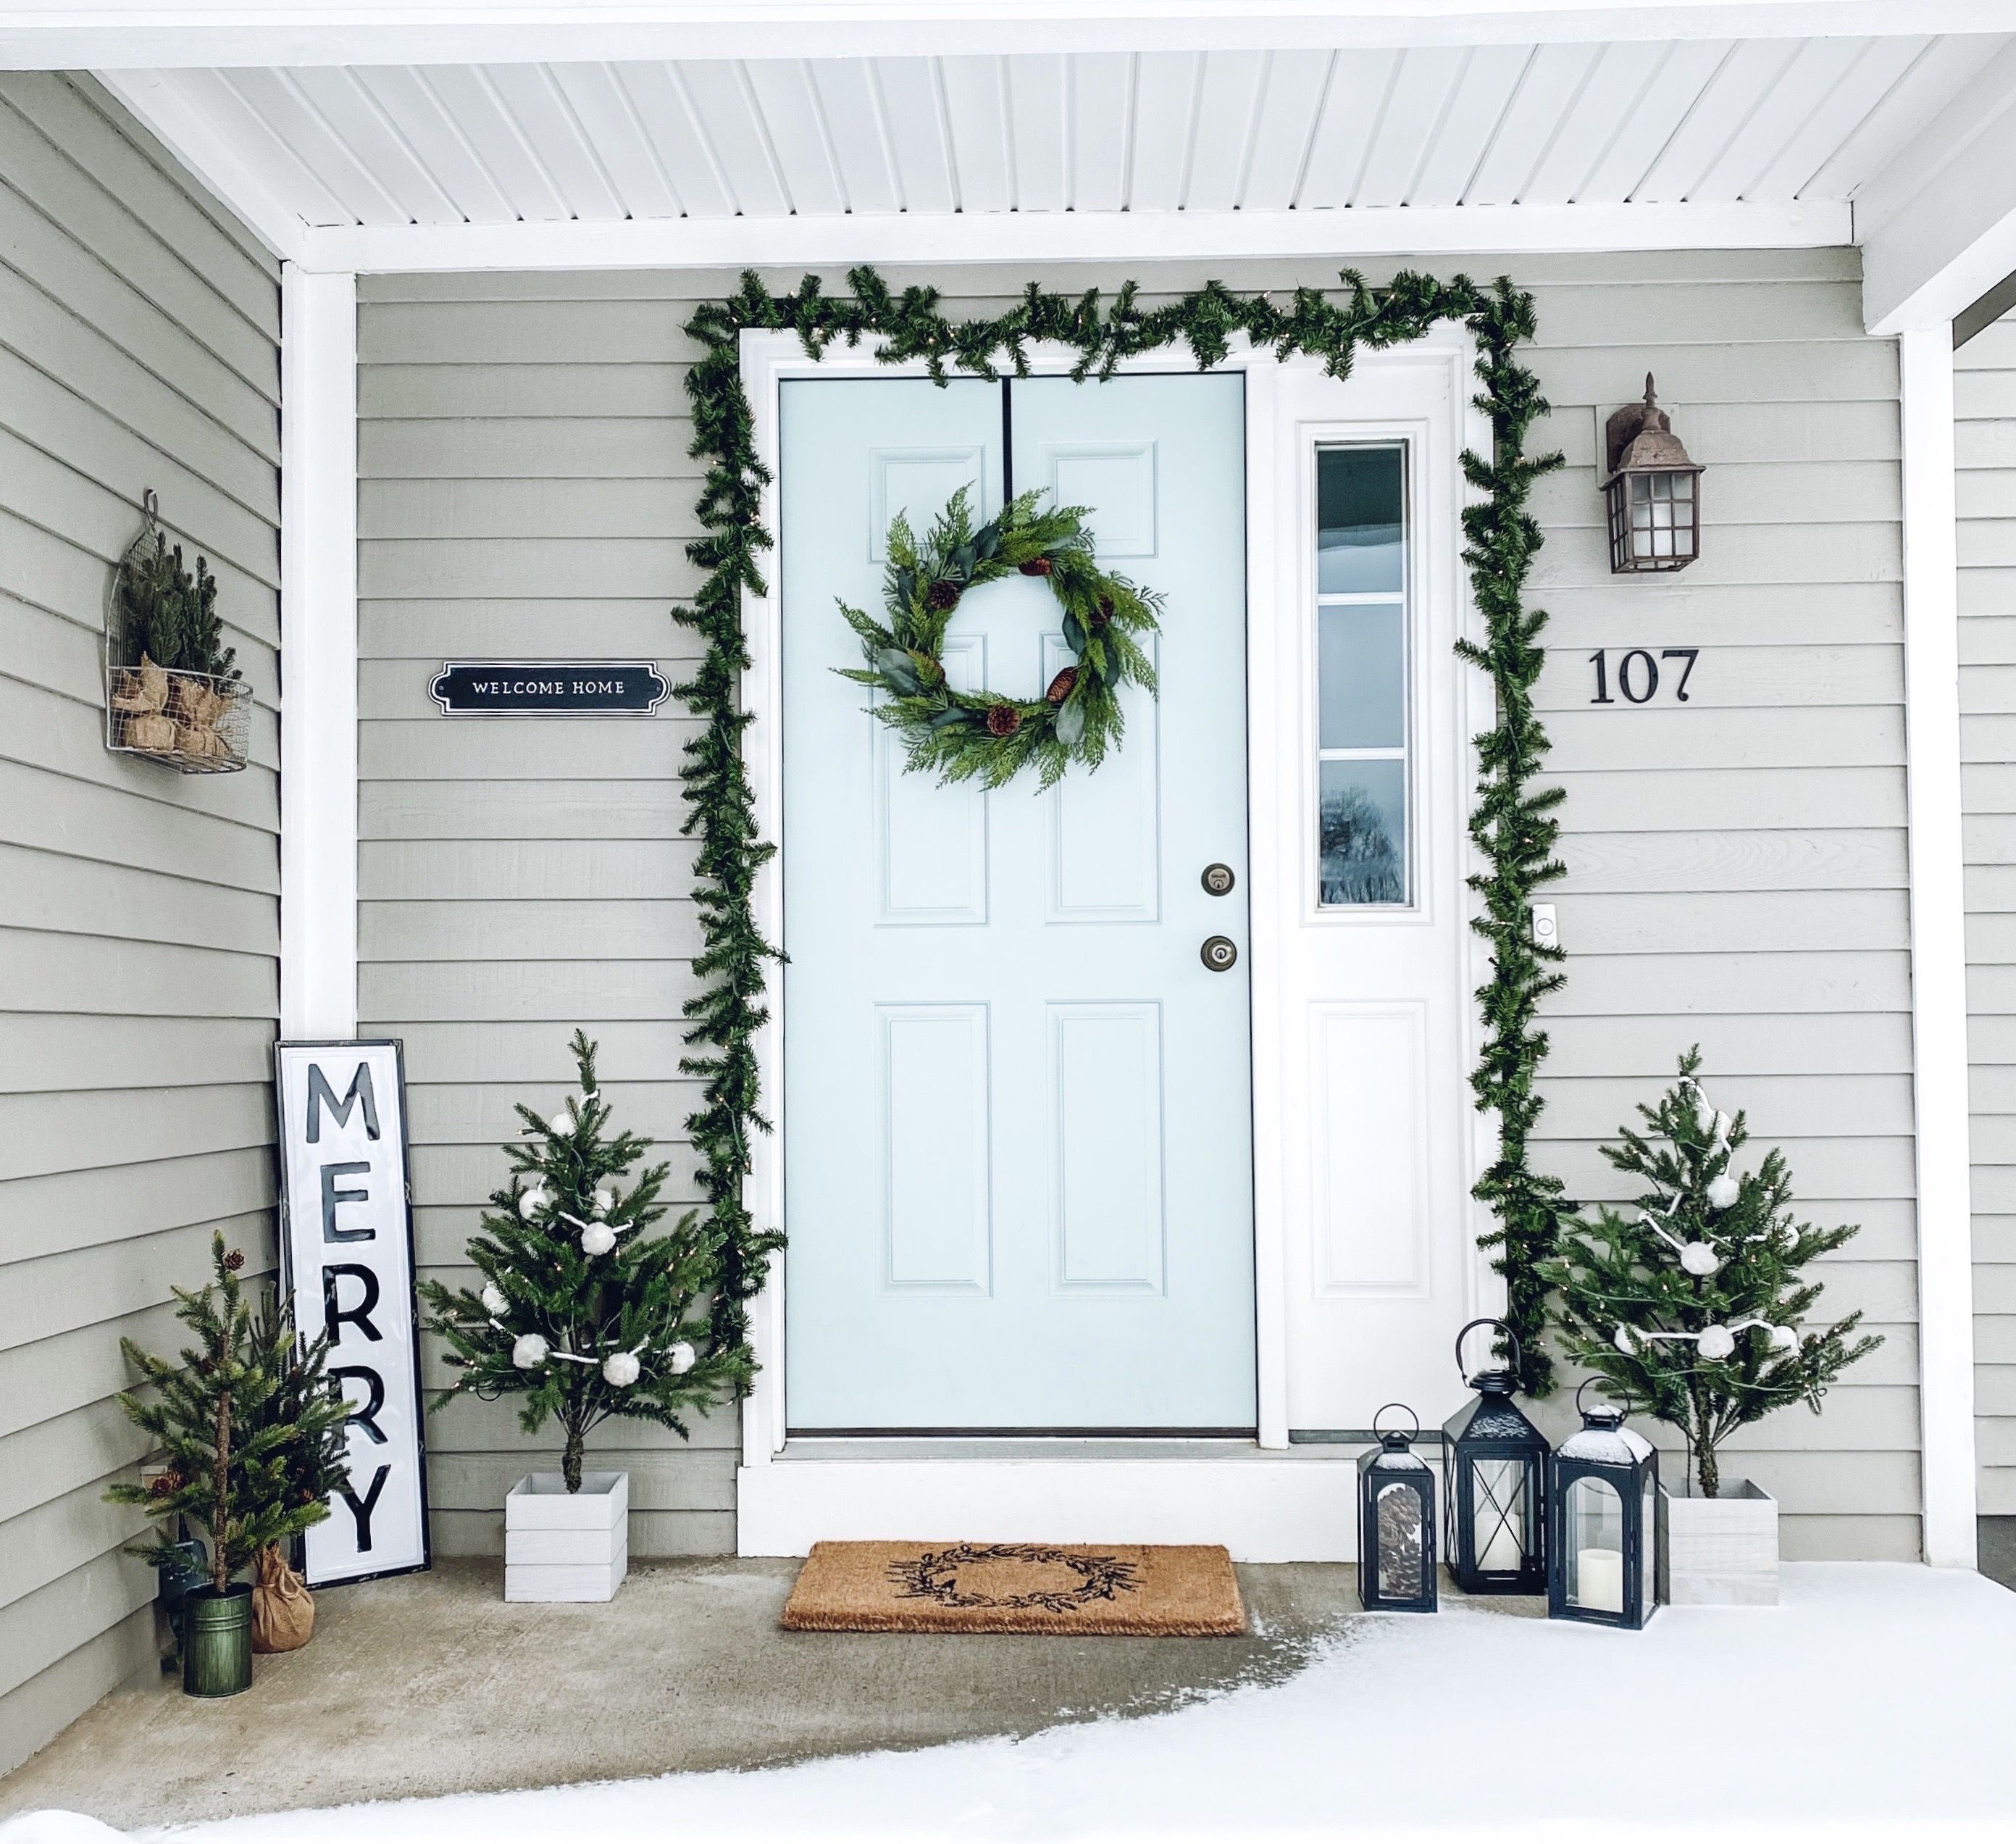 35+ Inspiring Front Front Porch Christmas Decorations